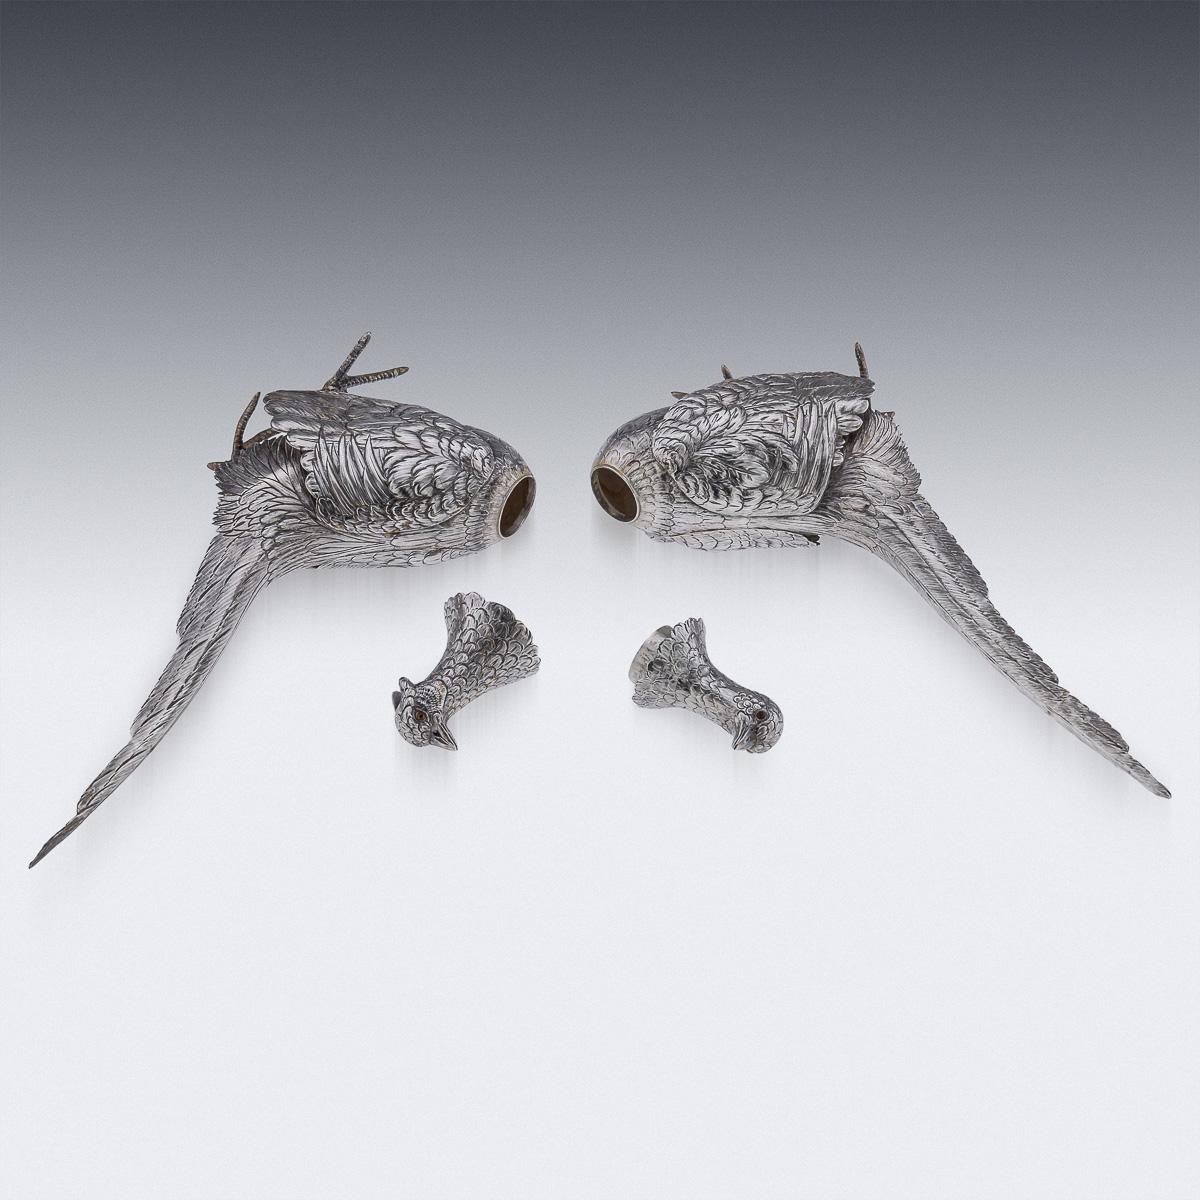 Antique 20th Century Solid Silver Pair Of Pheasant Statues c.1920 For Sale 6